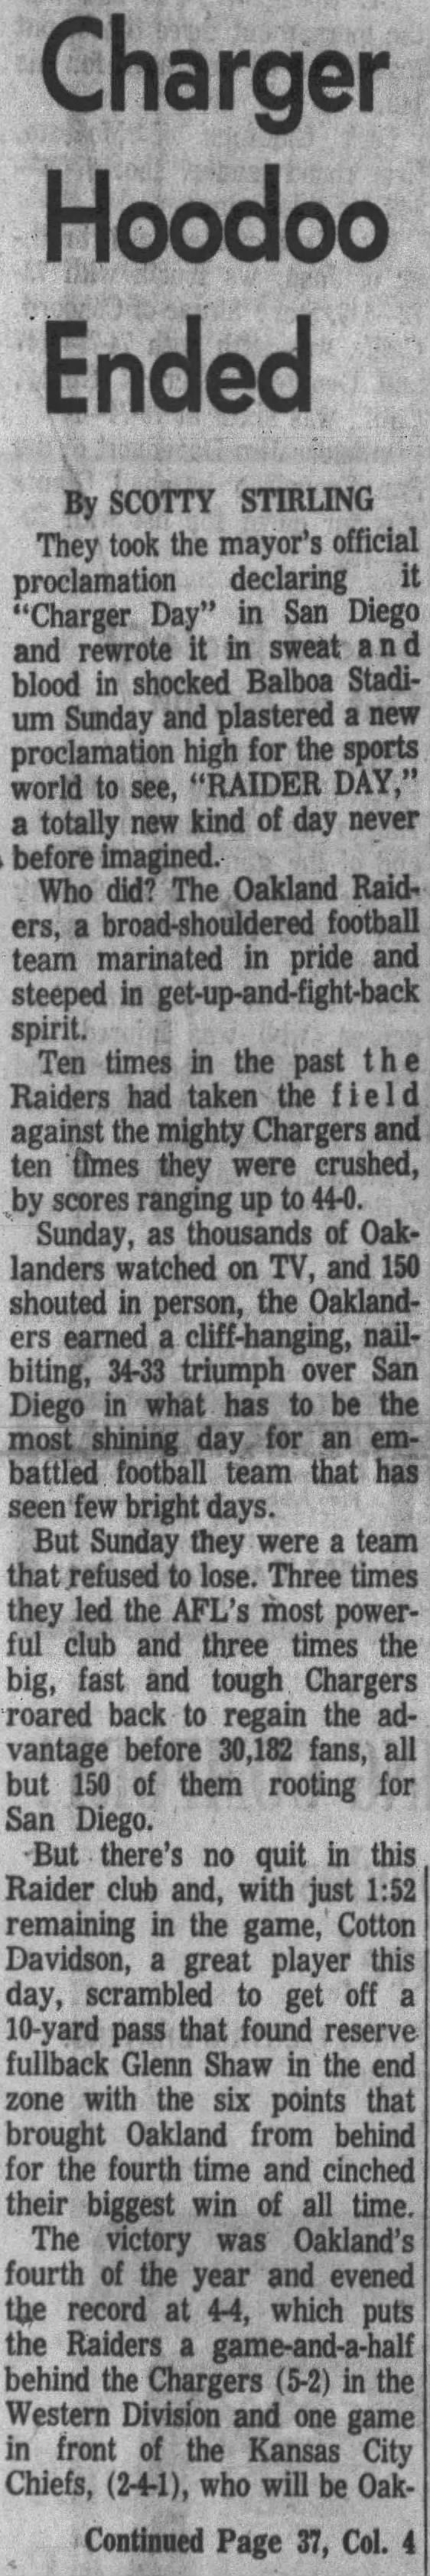 Chargers 33-34 Raiders, 28 Oct 1963